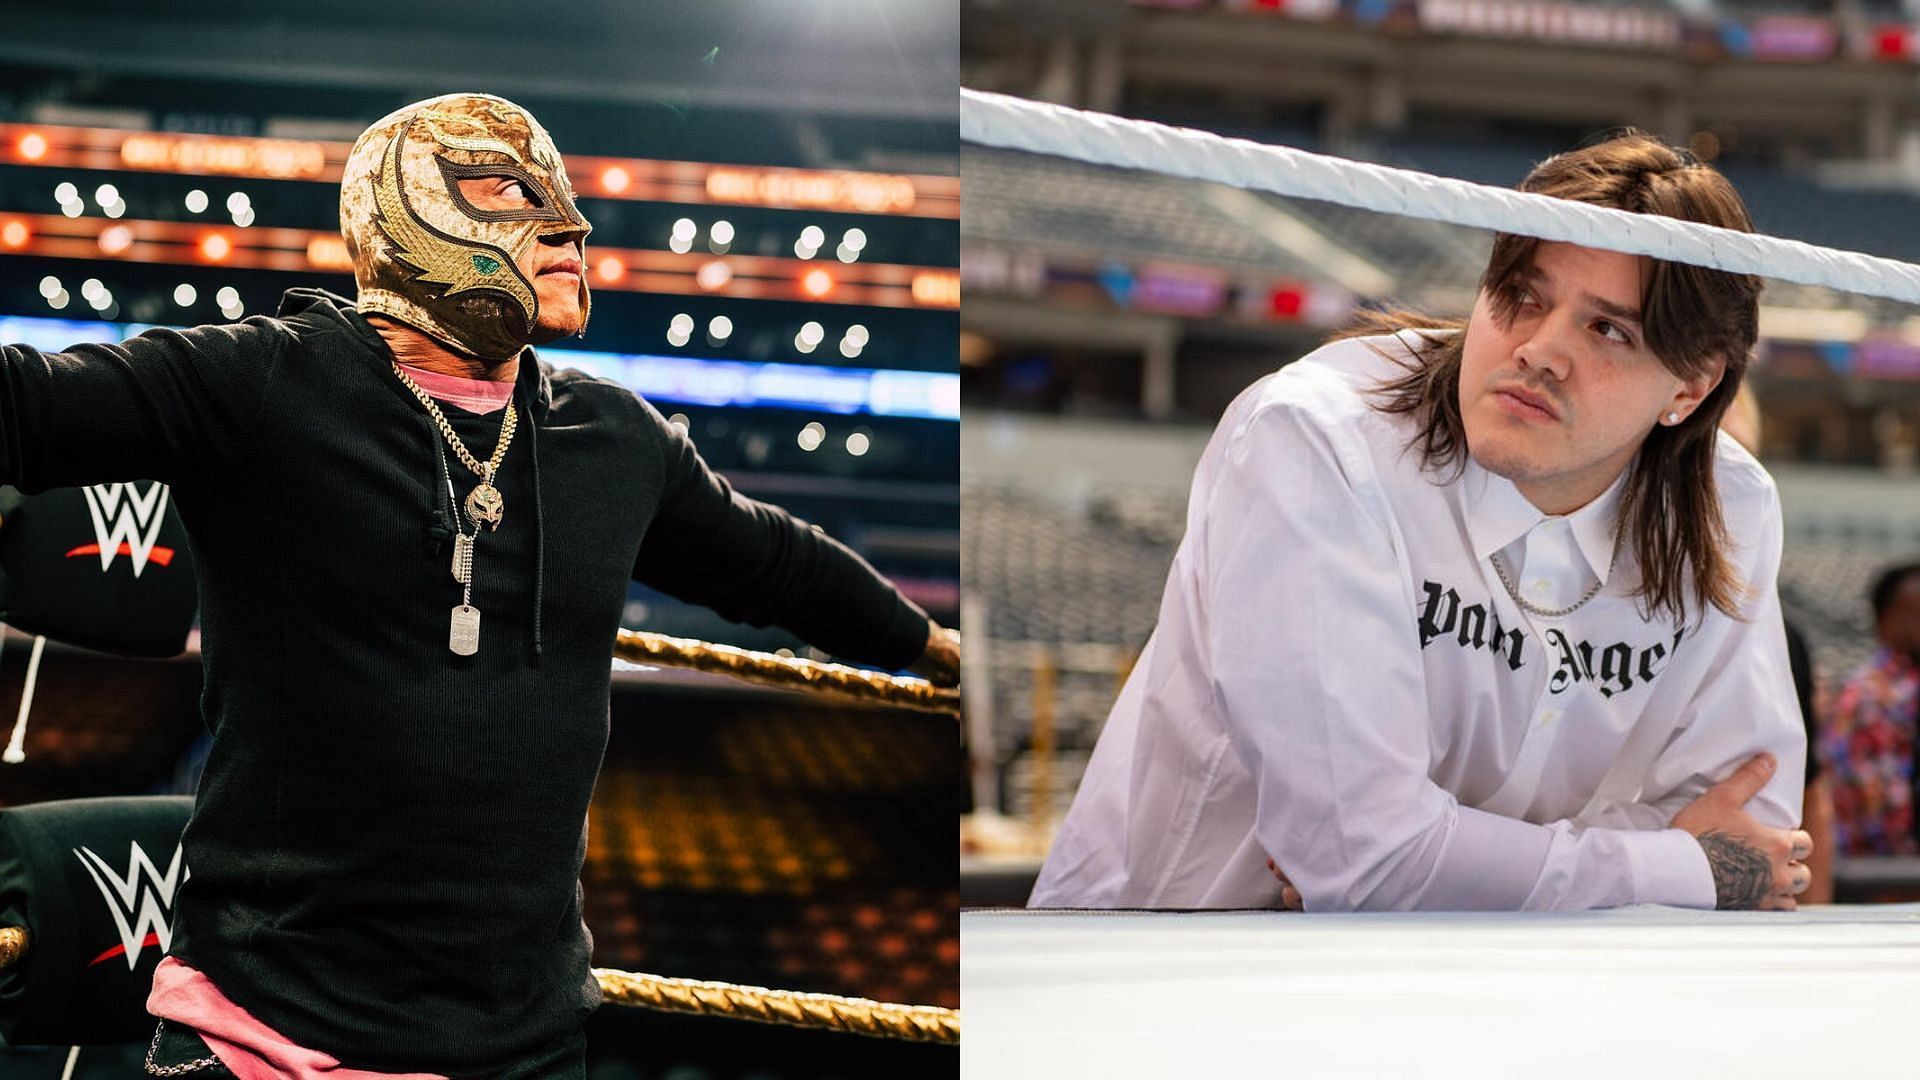 Rey Mysterio (left) and Dominik Mysterio (right) [Image Credit: WWE]